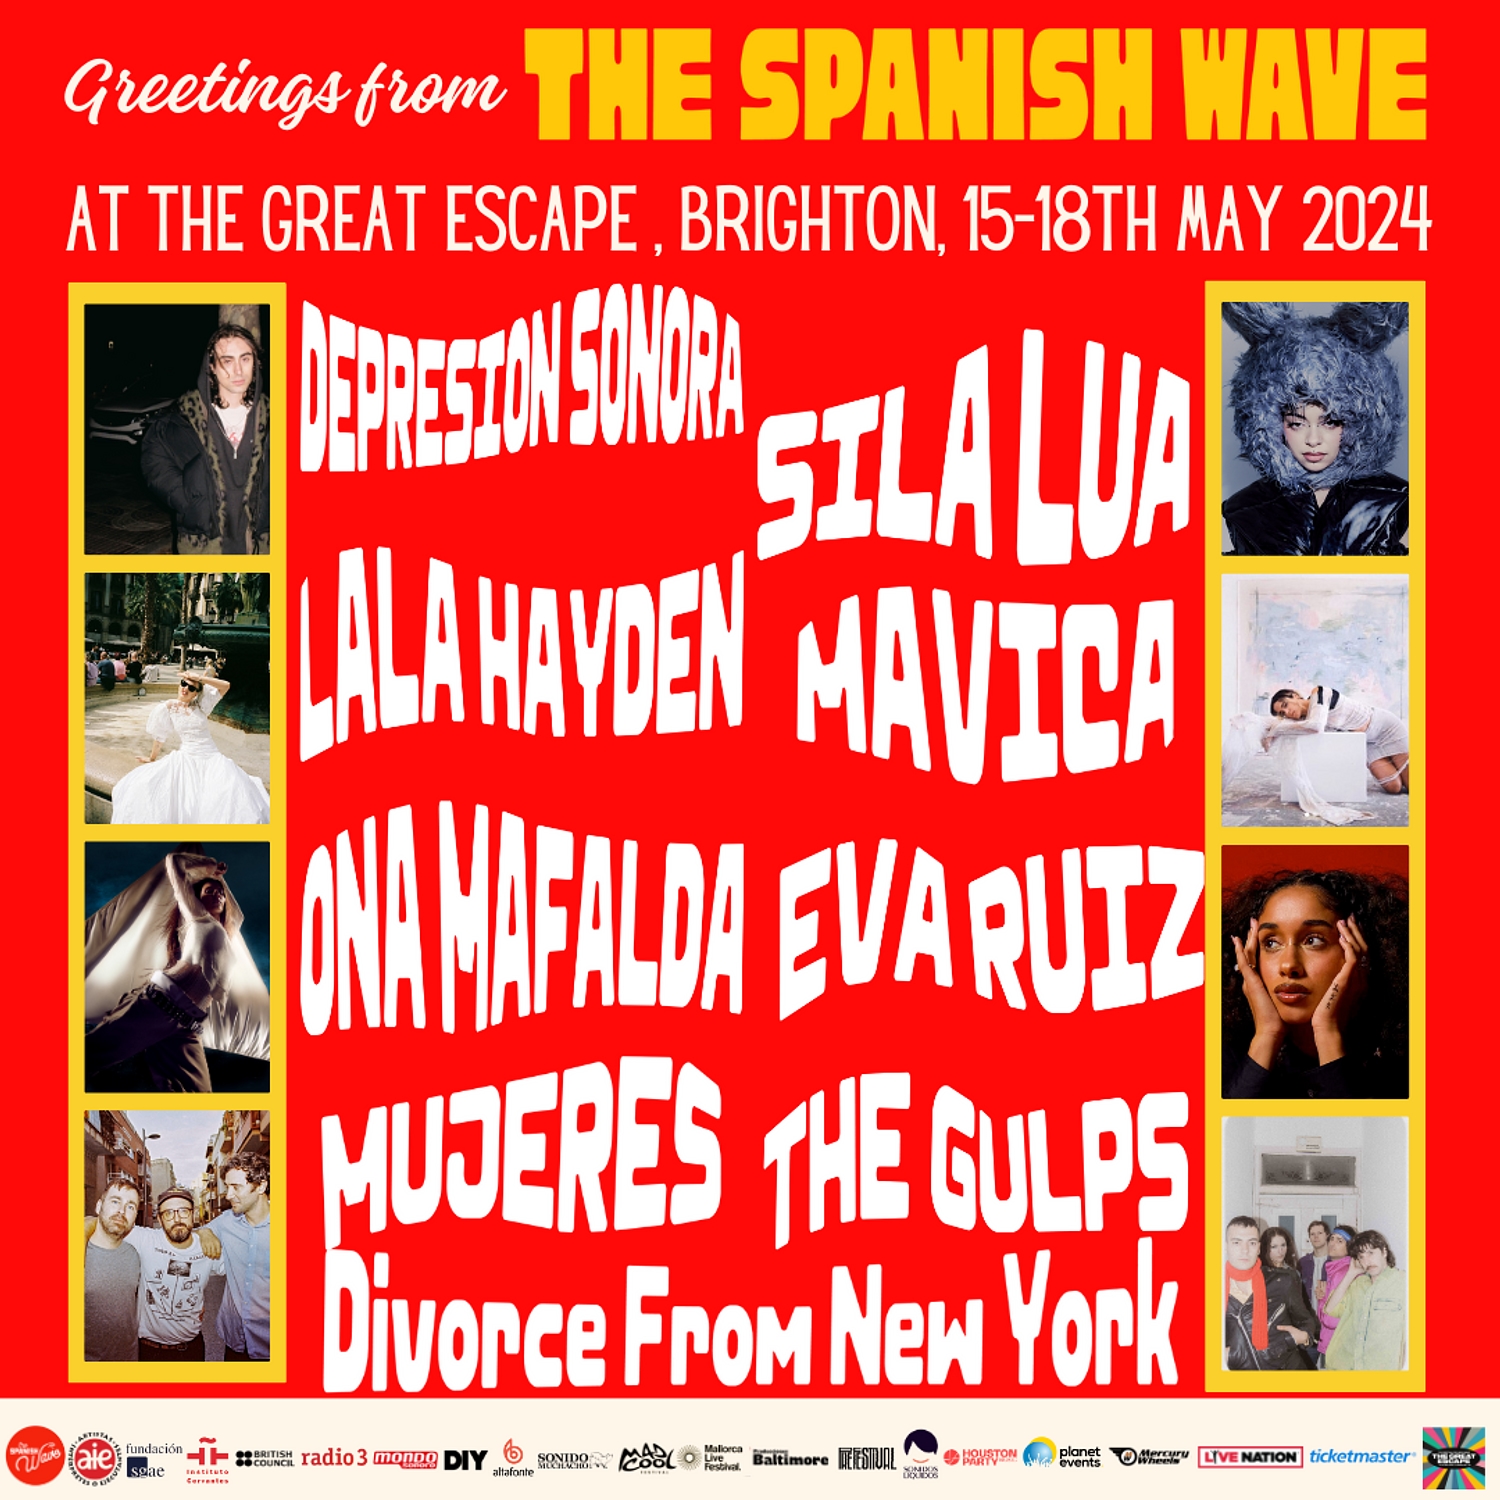 Lala Hayden, Eva Ruiz & The Gulps are amongst Spanish acts set to play The Great Escape 2024